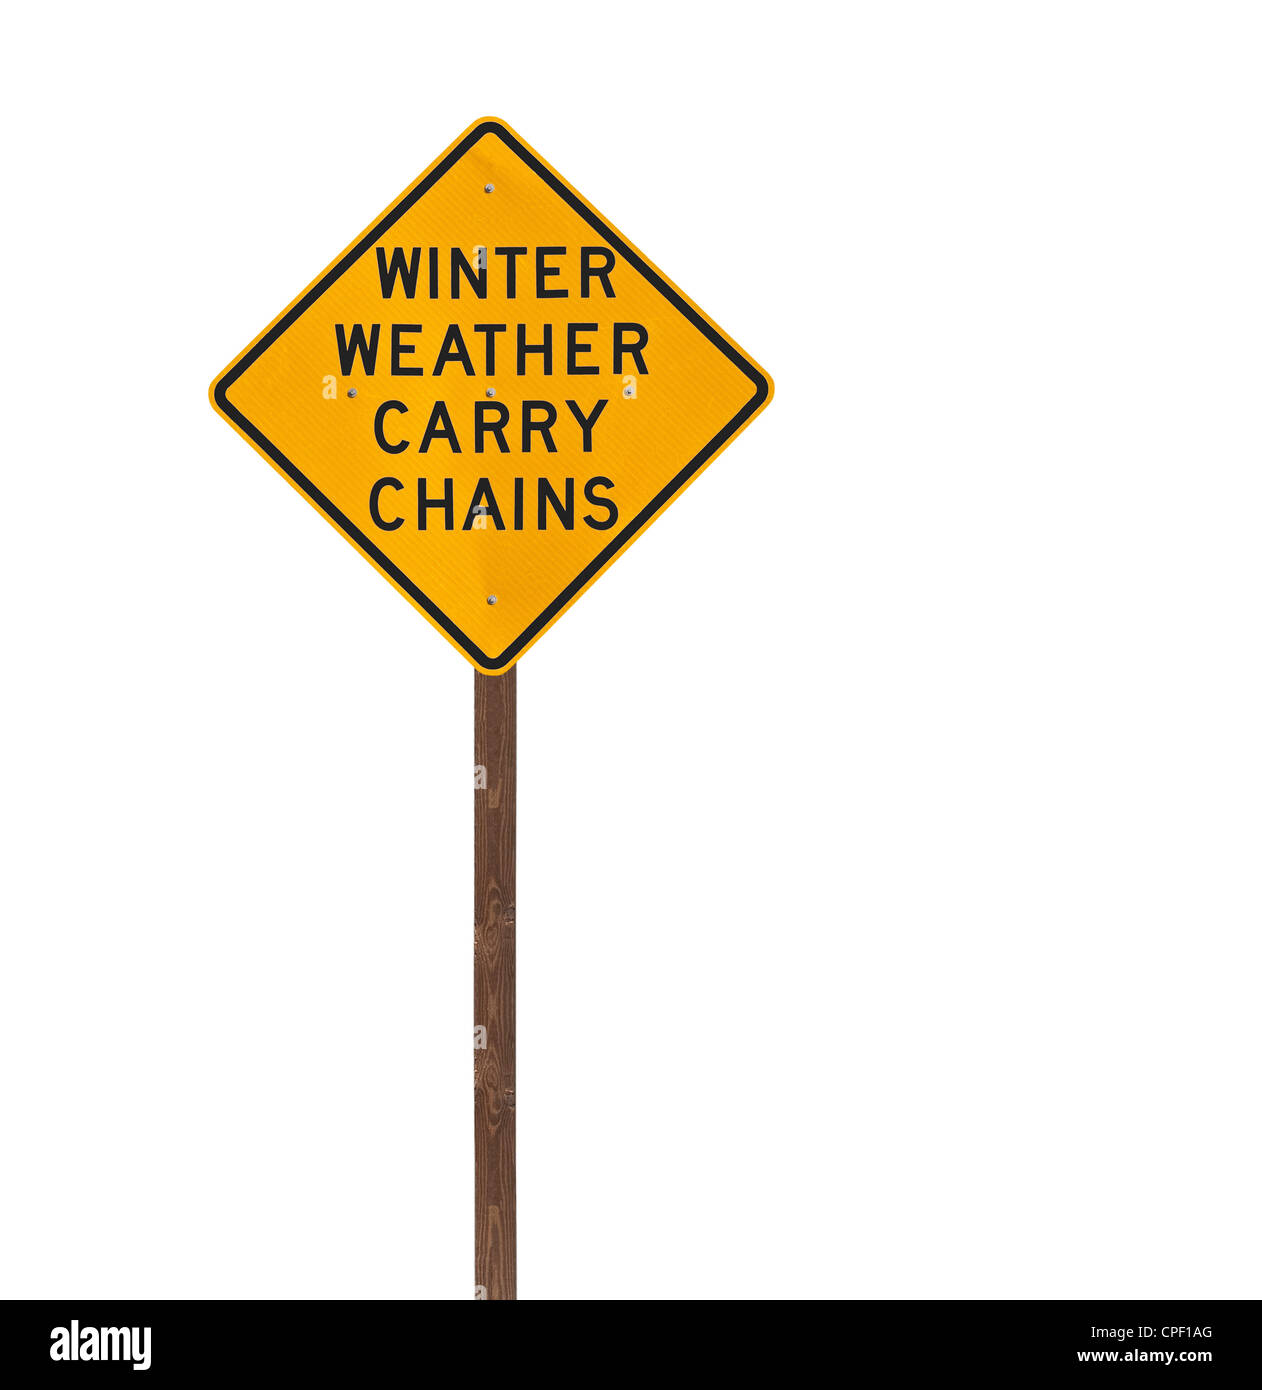 Tall winter weather carry chains warning sign isolated on white. Stock Photo